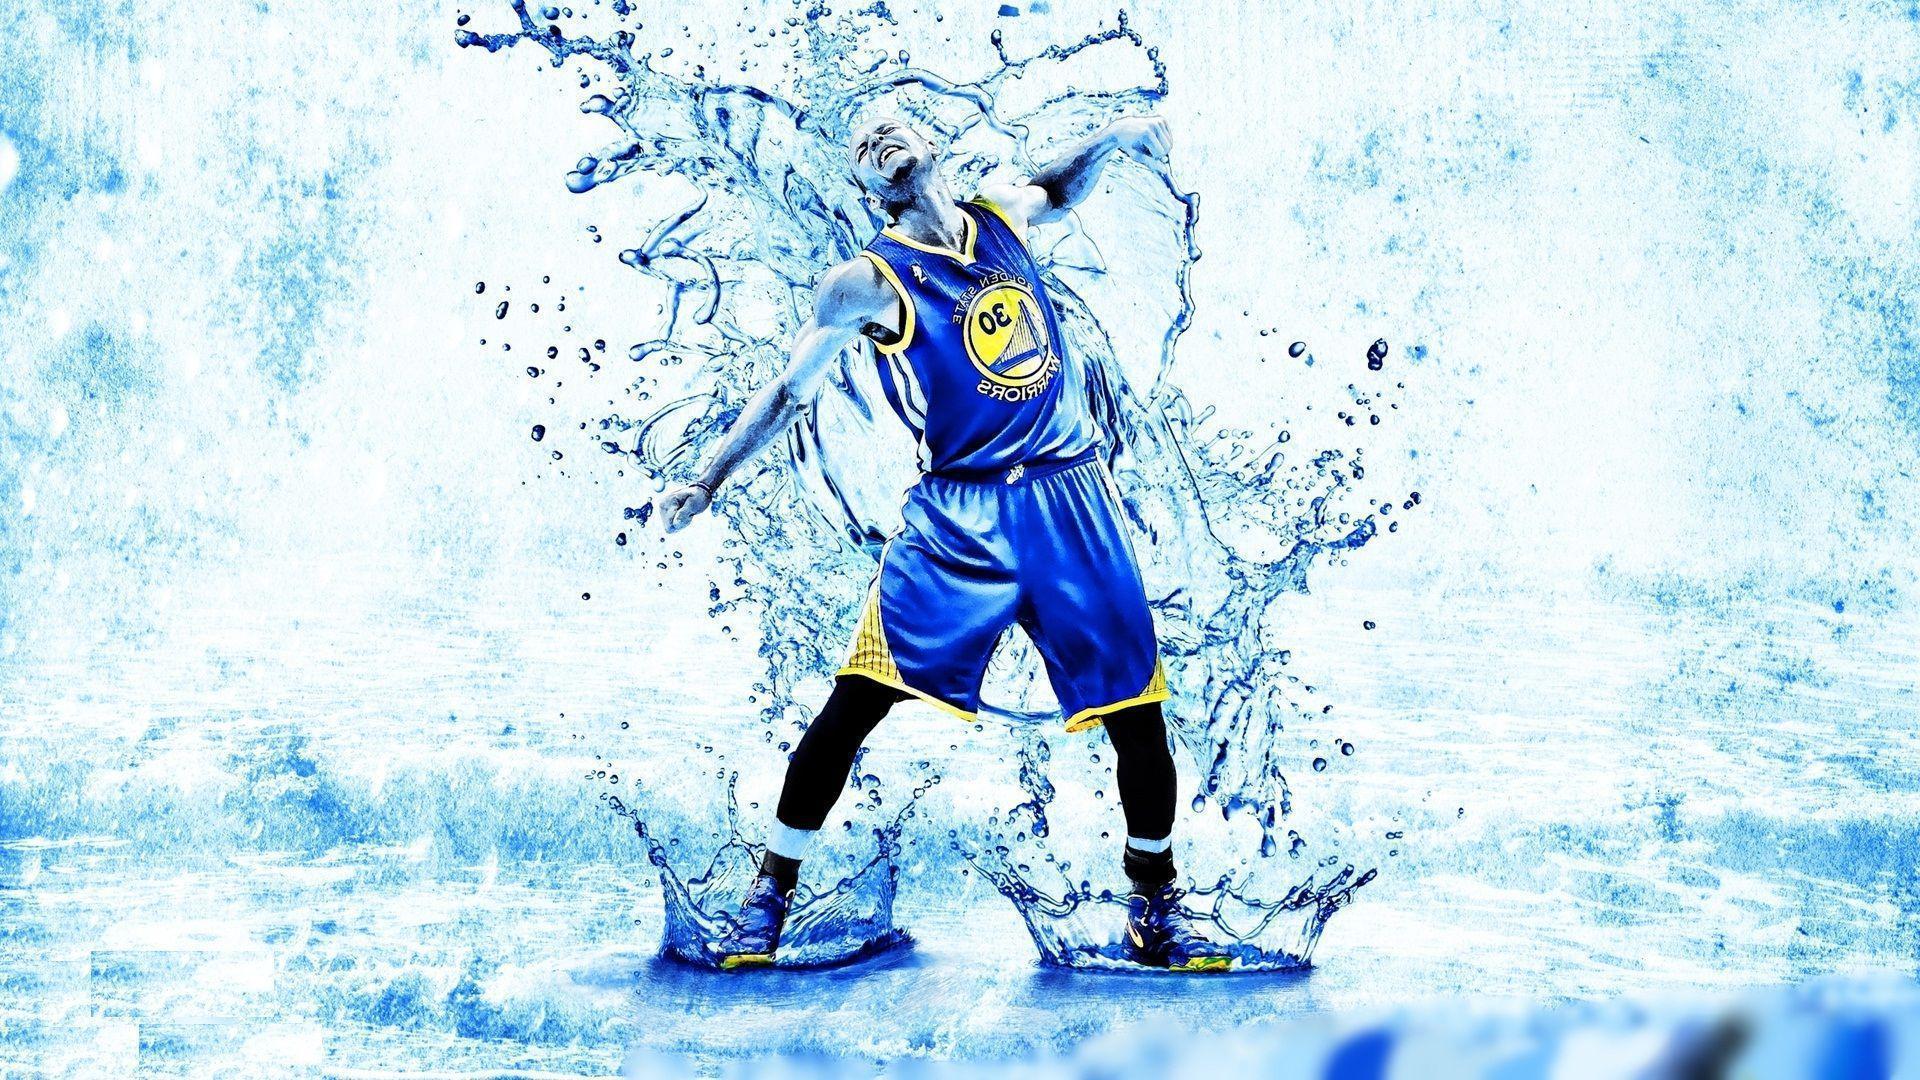 Stephen Curry wallpaper free download. Wallpaper, Background